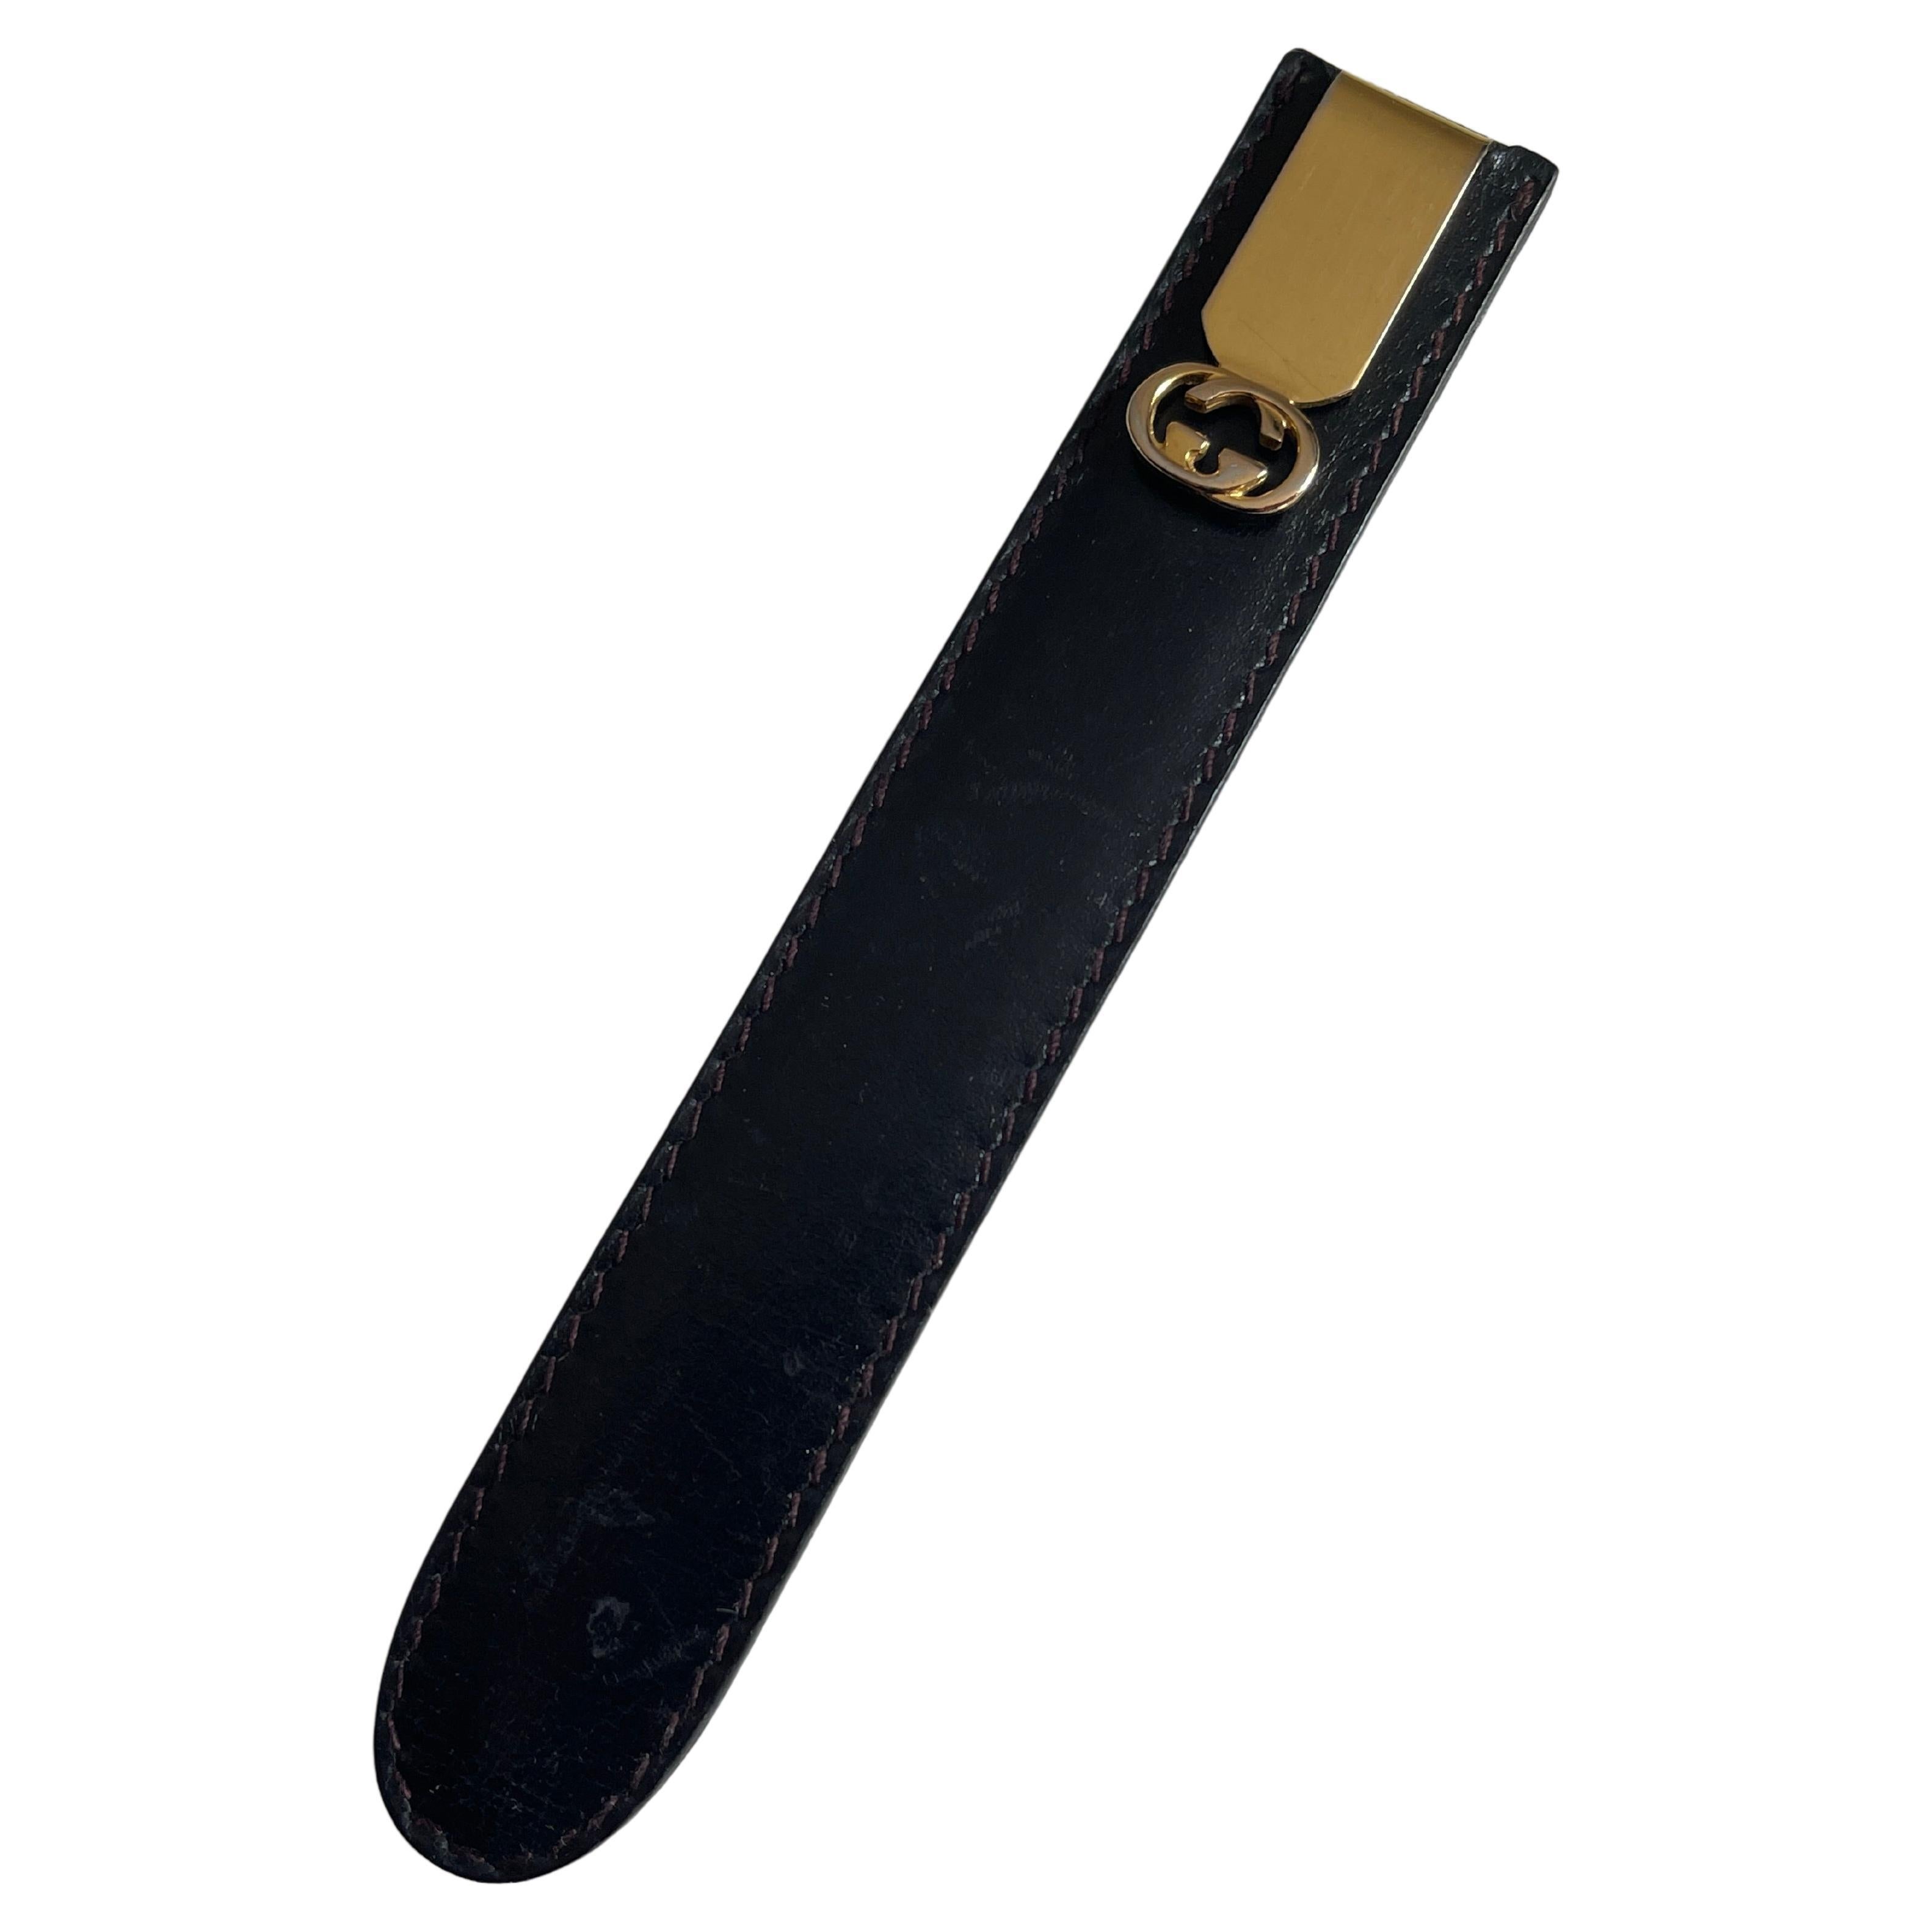 Gucci Gold Metal Letter Opener in Black Leather Case